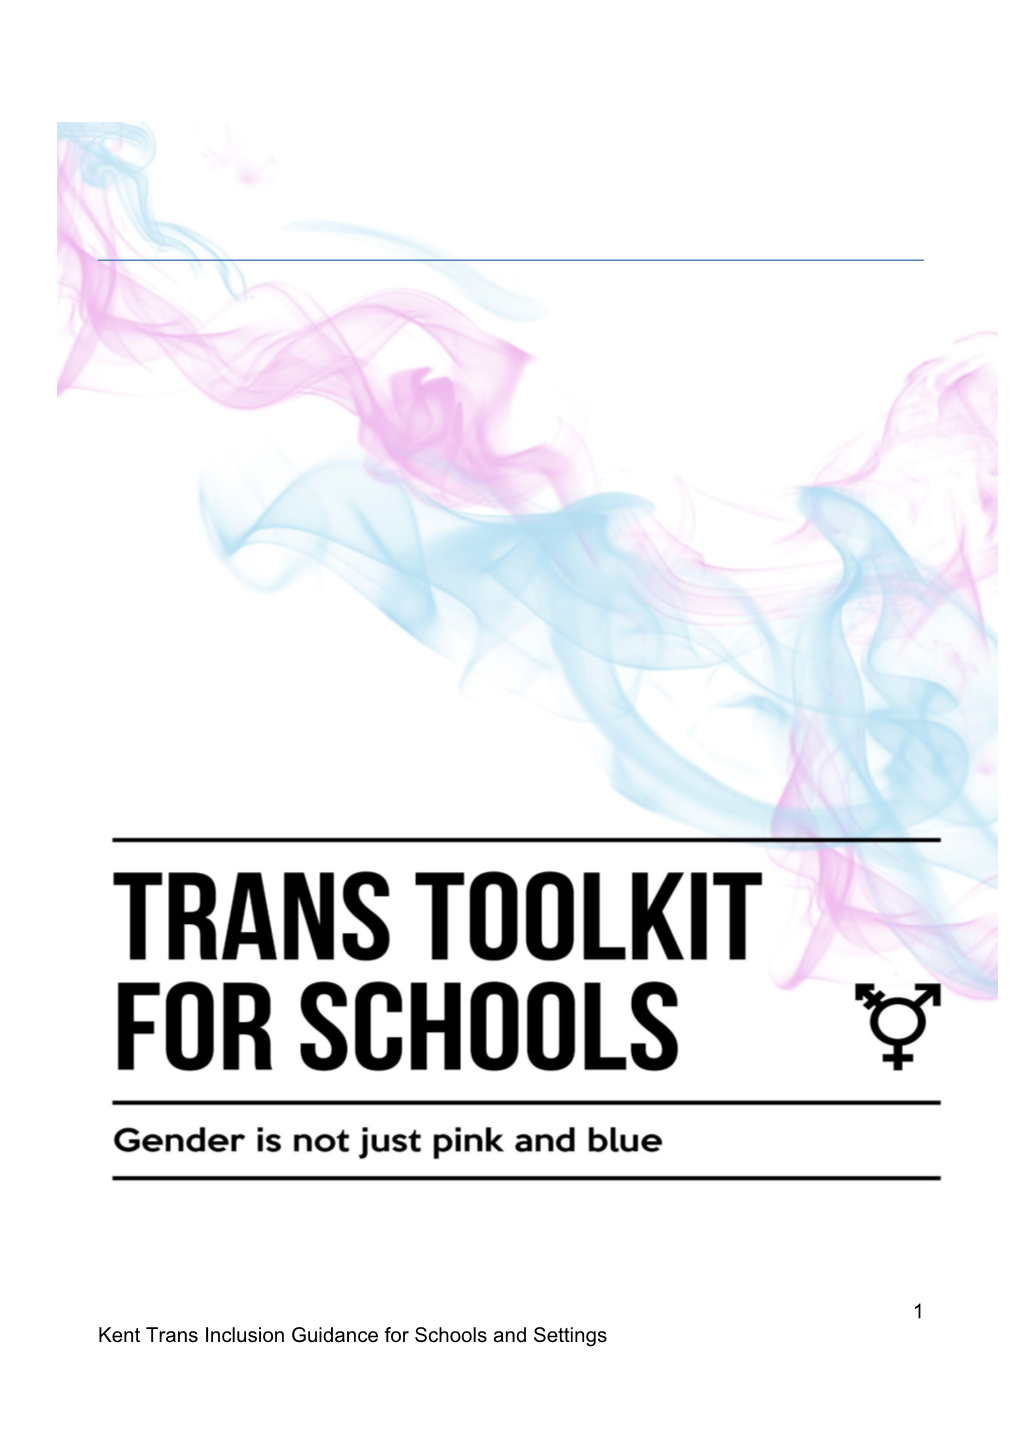 Kent *Trans Inclusion Guidance for Schools and Settings